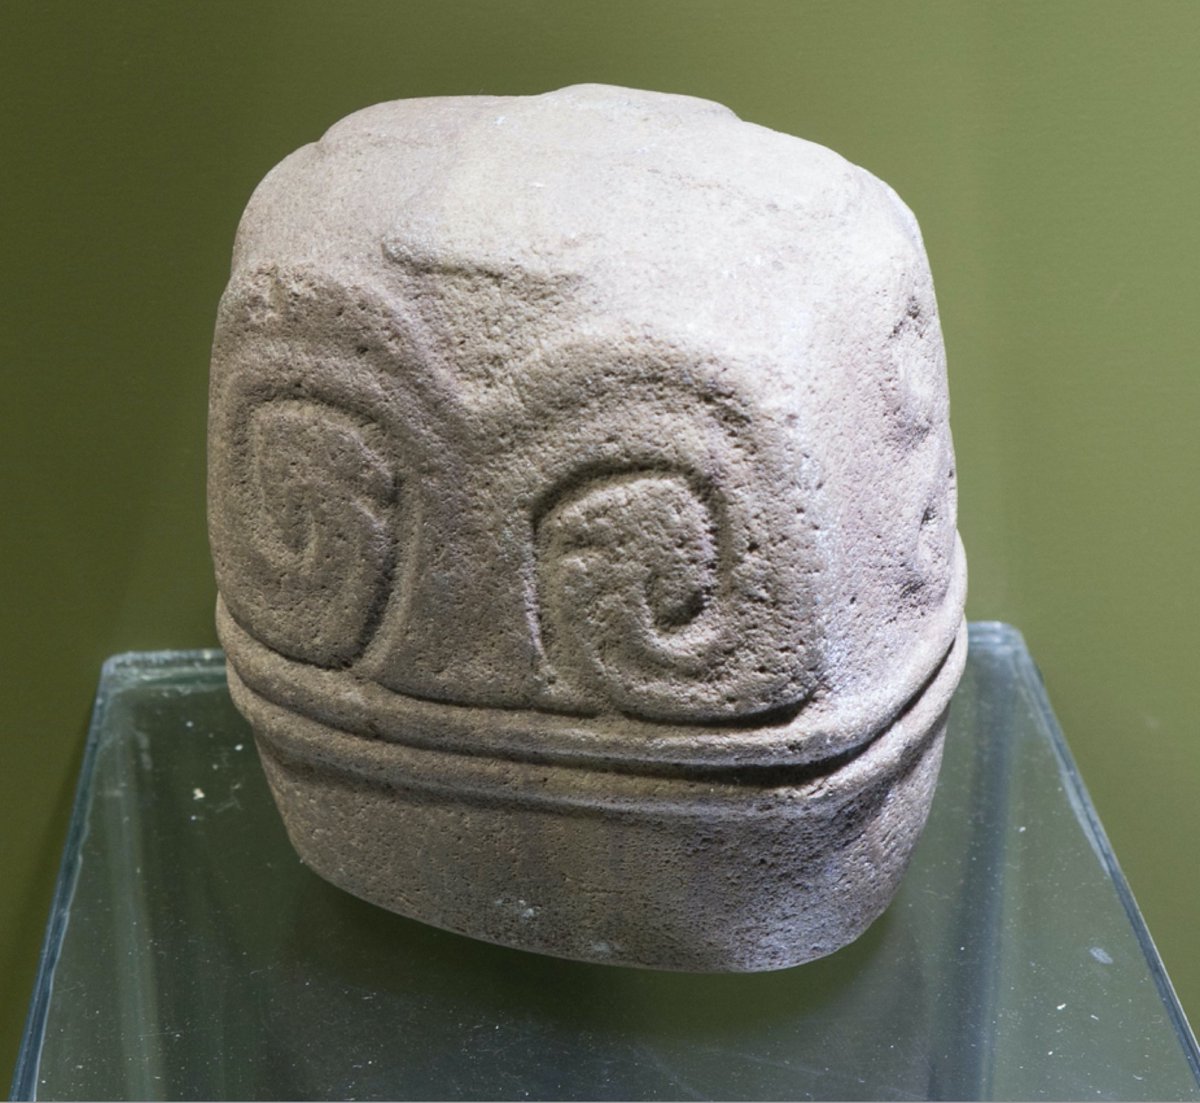 I have studied a number of them in museums in Bolivia, Peru, and Germany. I have argued elsewhere that these lightning stones may have been animate, with a kind of aura. More on that soon. Here is another from a non-excavated context from the arch museum in La Paz. (4/25)